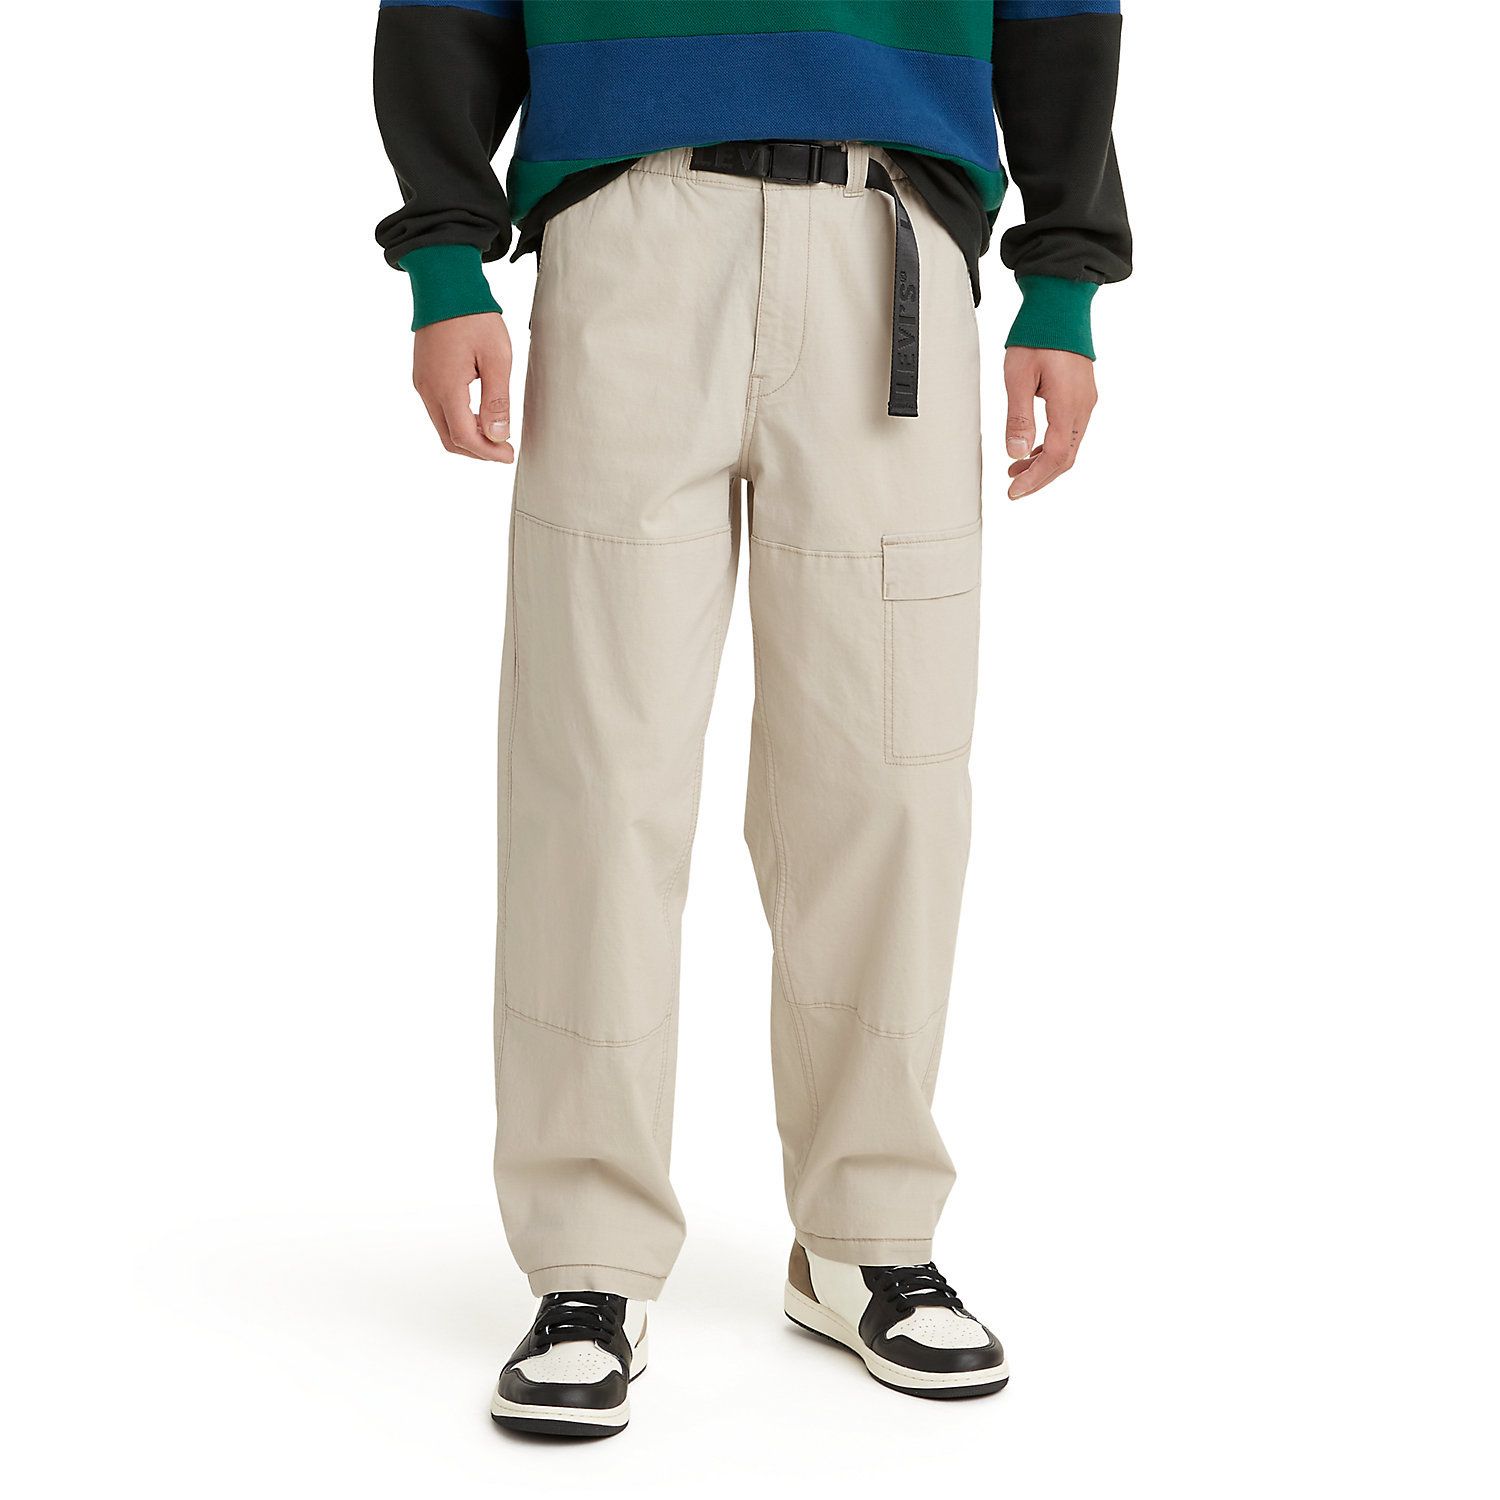 Image for Levi's Men's Relaxed-Fit Field Pants at Kohl's.